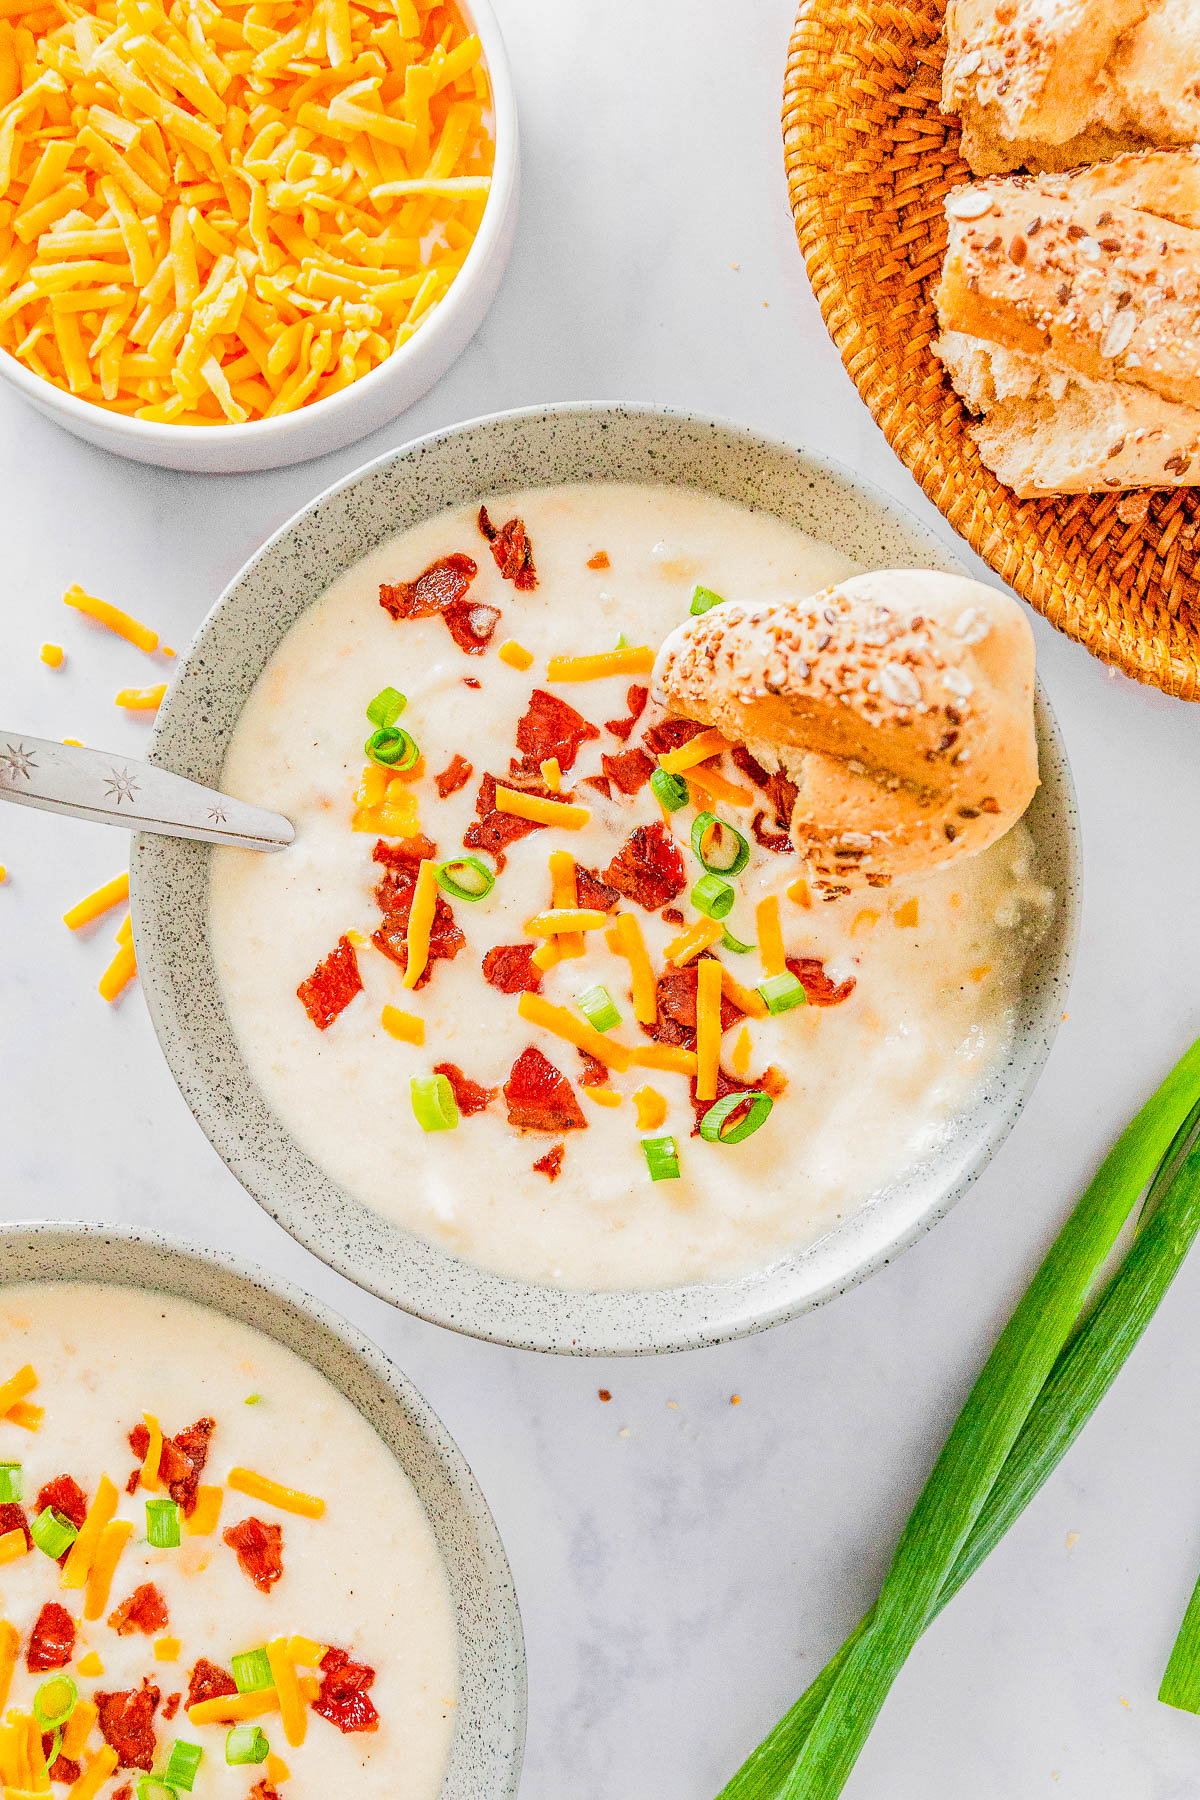 Easy Slow Cooker Potato Soup - This LOADED potato soup is reminiscent of your favorite LOADED baked potato recipe, but conveniently made in your Crock-Pot! In each bite there are tender potatoes amidst a creamy and cheesy broth, topped with crispy bacon bits, green onions, and topped with cheddar cheese for a COMFORT FOOD delight! Easy to make, great for busy weeknights, picky eater approved, and perfect for chilly weather!